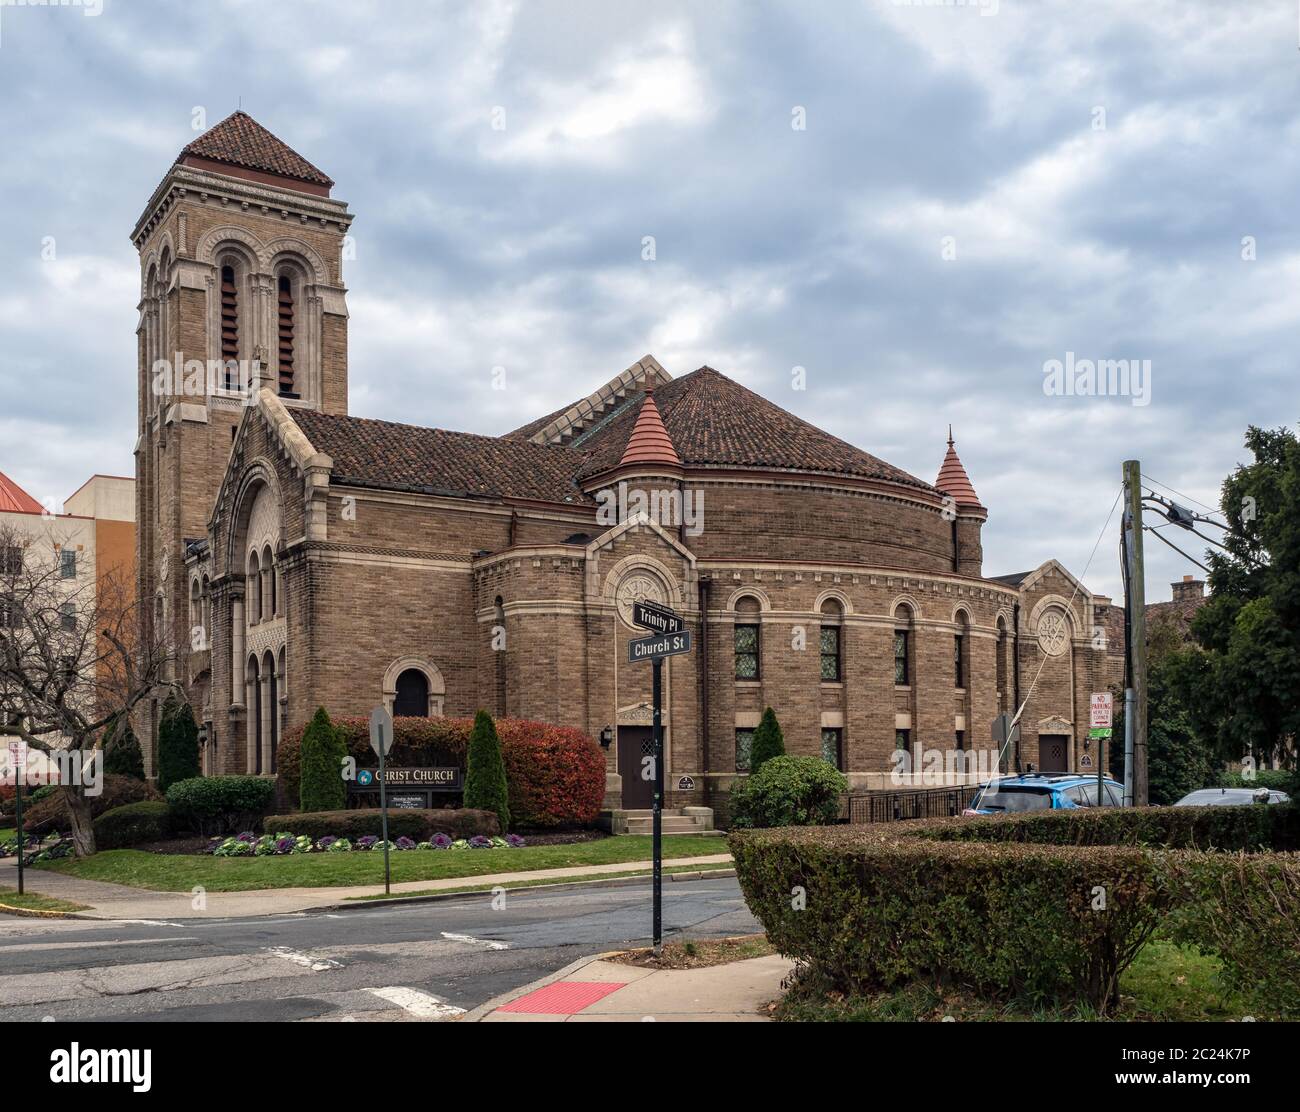 MONTCLAIR, NEW JERSEY, USA - NOVEMBER 22, 2019: Exterior view of the pretty  Romanesque Christ Church in Church Street Stock Photo - Alamy